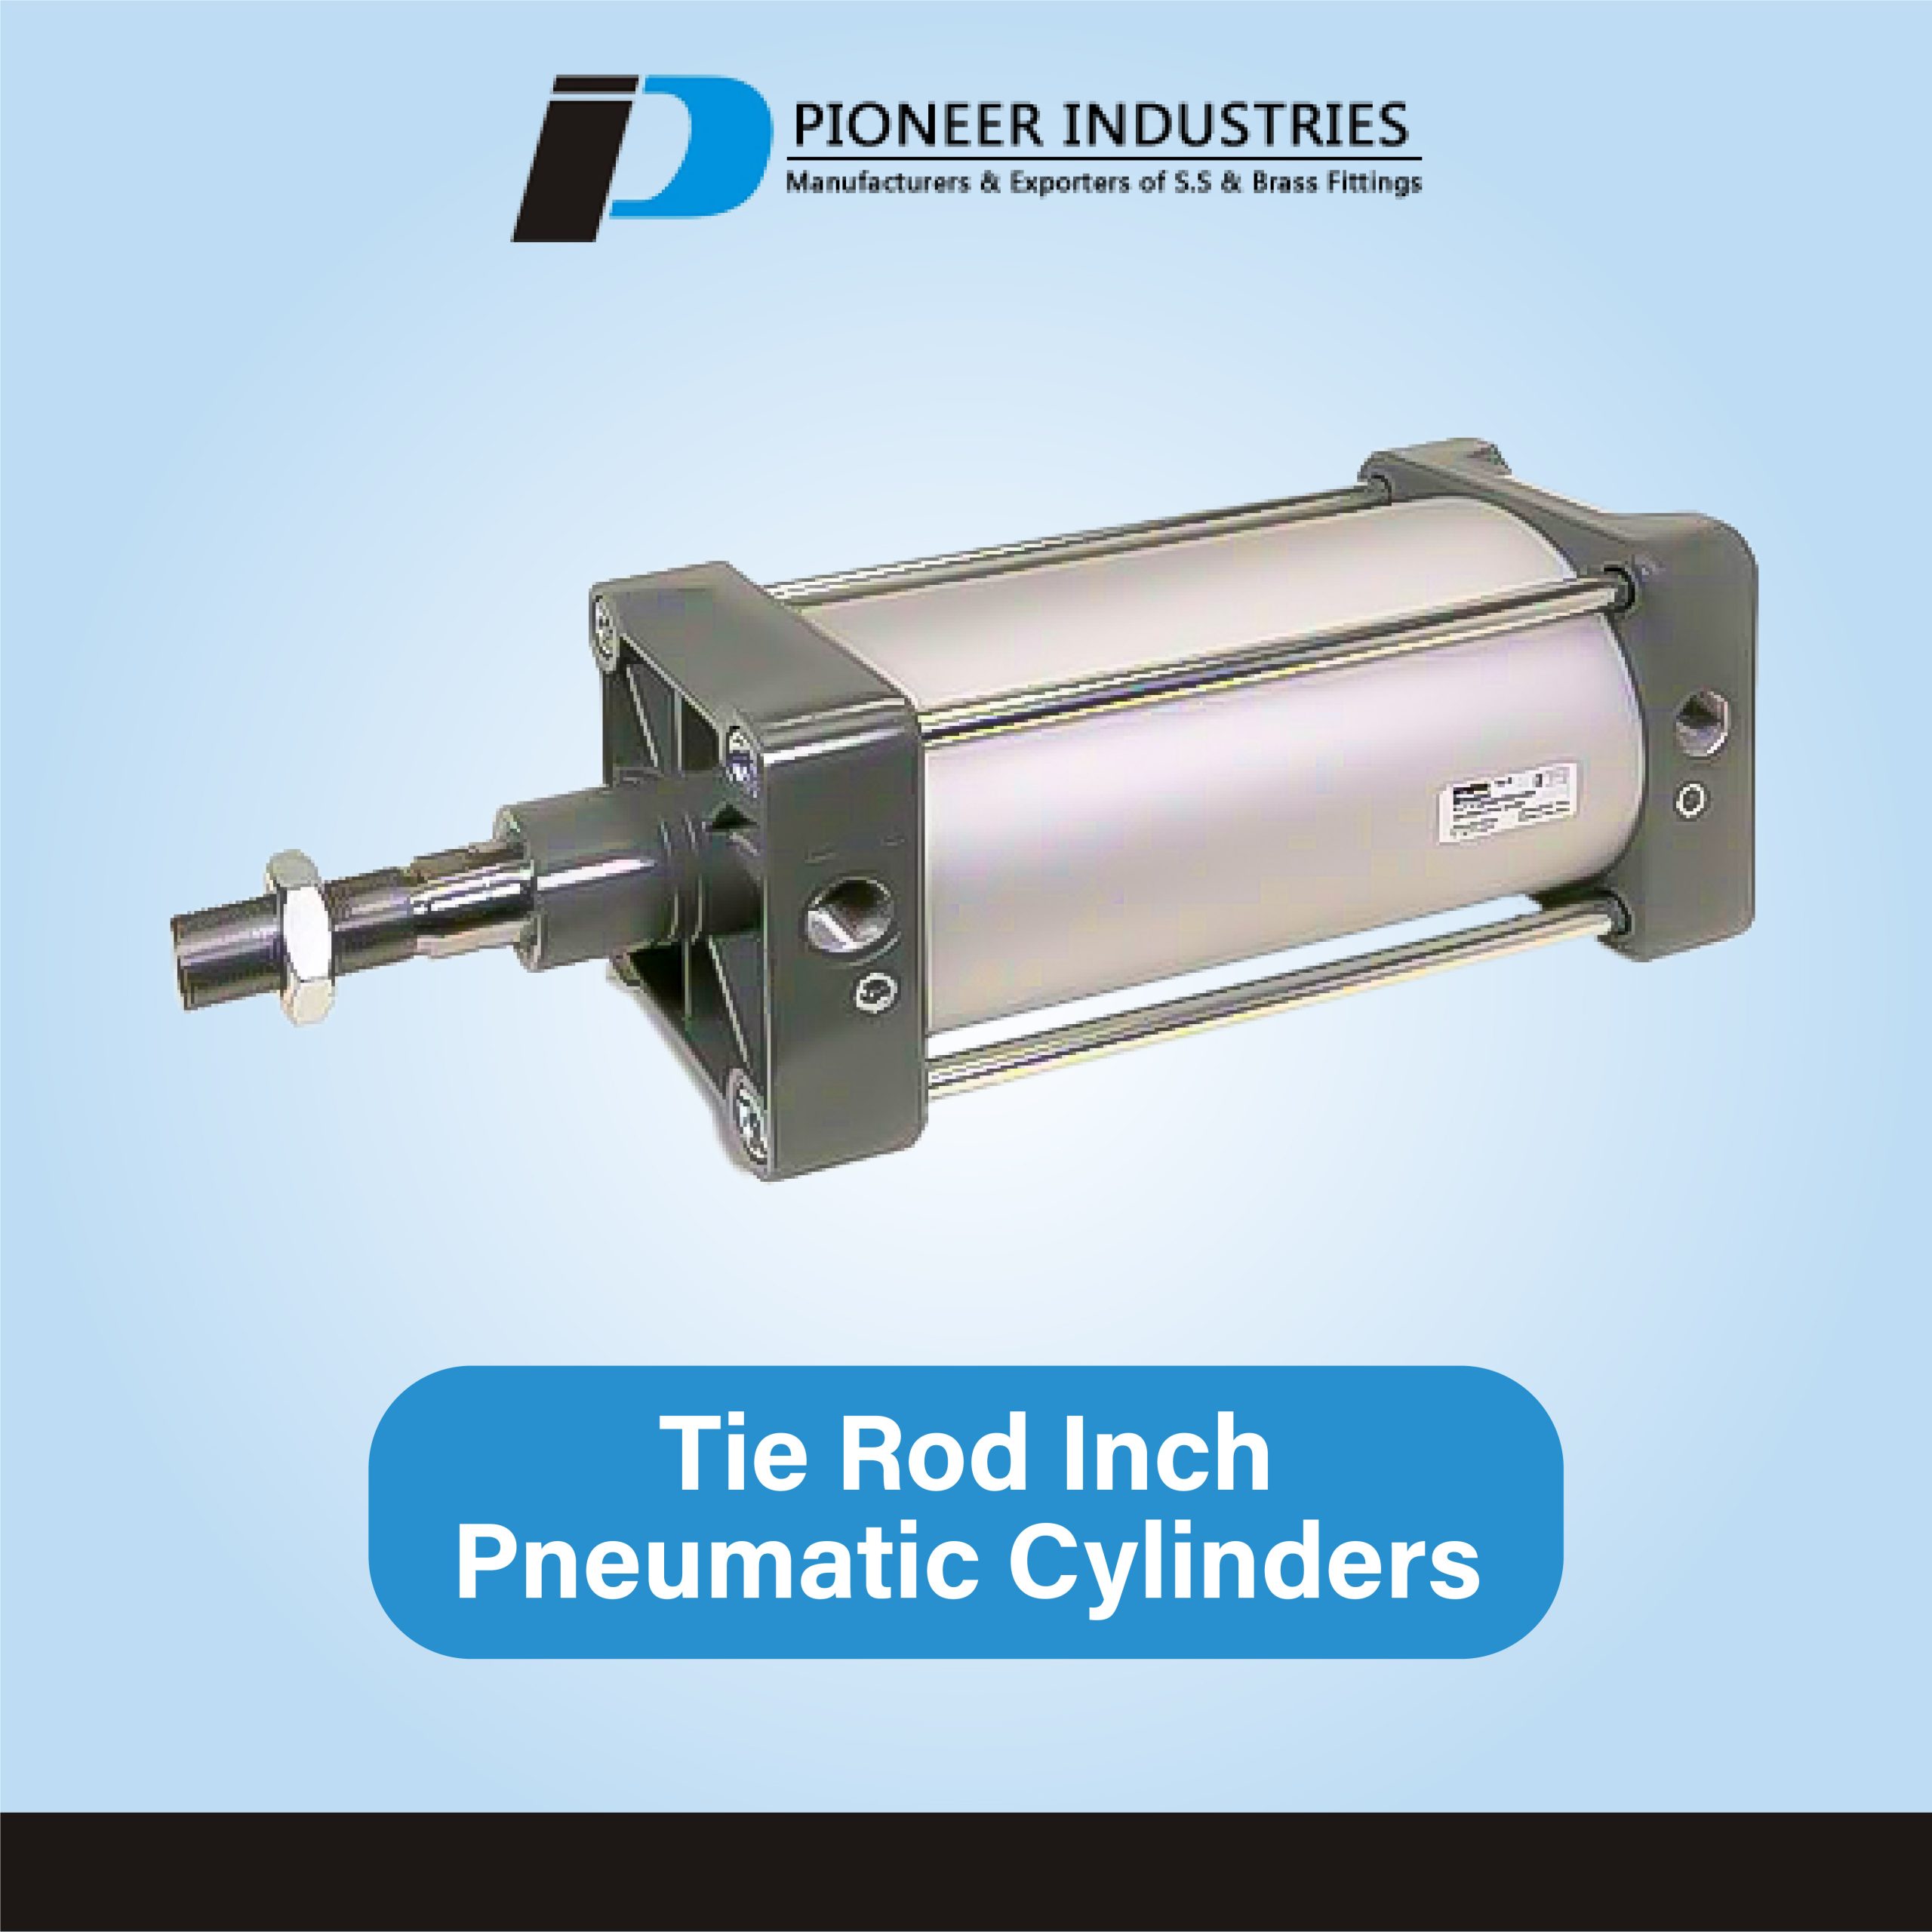 Tie Rod Inch Pneumatic Cylinders